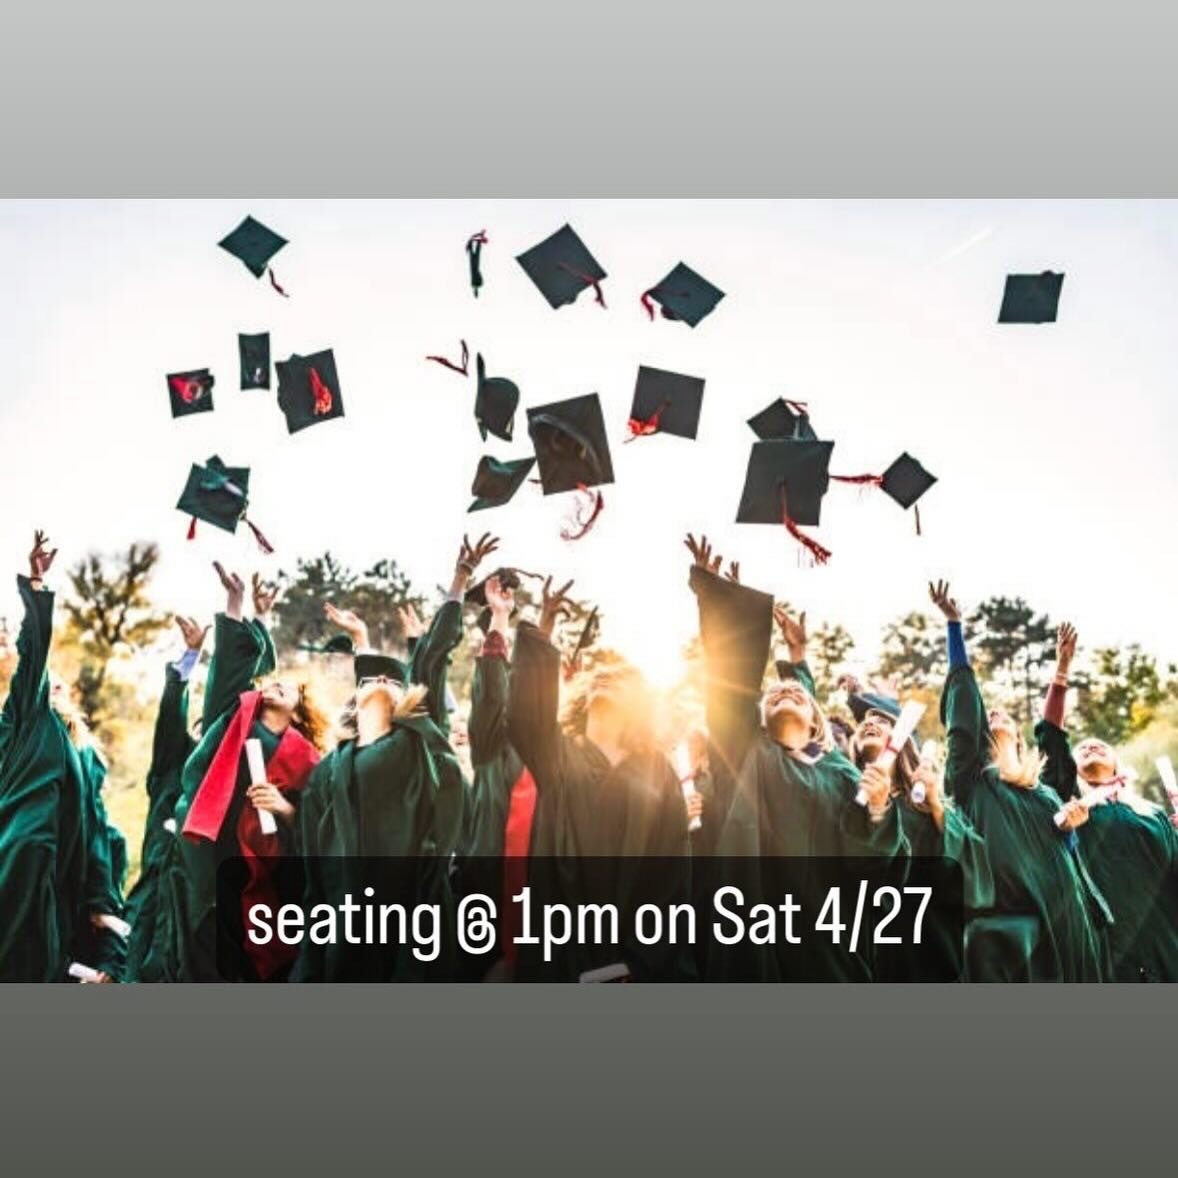 We&rsquo;re opening early to accommodate your graduation celebration! Call us: 517-663-2500, or book online: englishinn.com

#lovelansing #spartanstrong #spartanswill💚 #spartanswill #msuspartans #graduationday #lansingrestaurants #lansingnoms #lansi